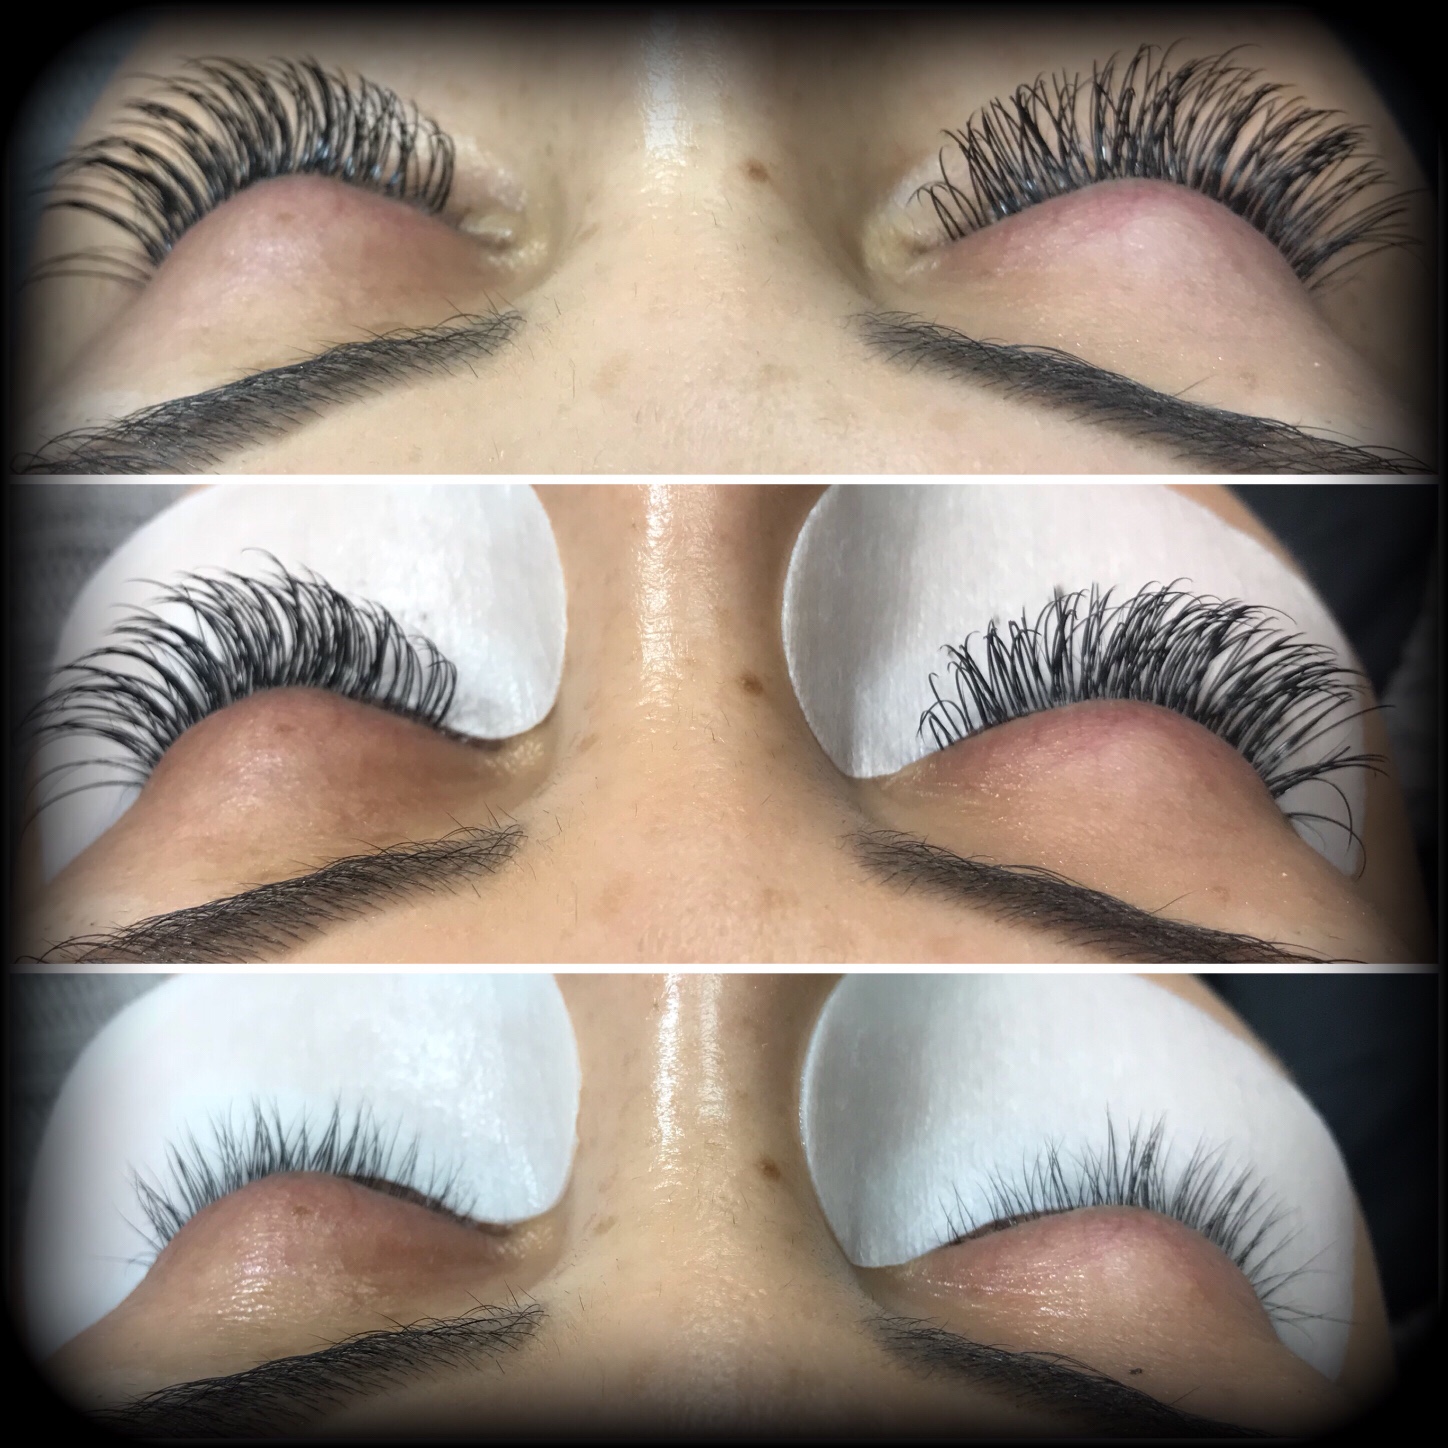 Light Up Your Look with Illumi-Lash Extensions! Radiate Elegance